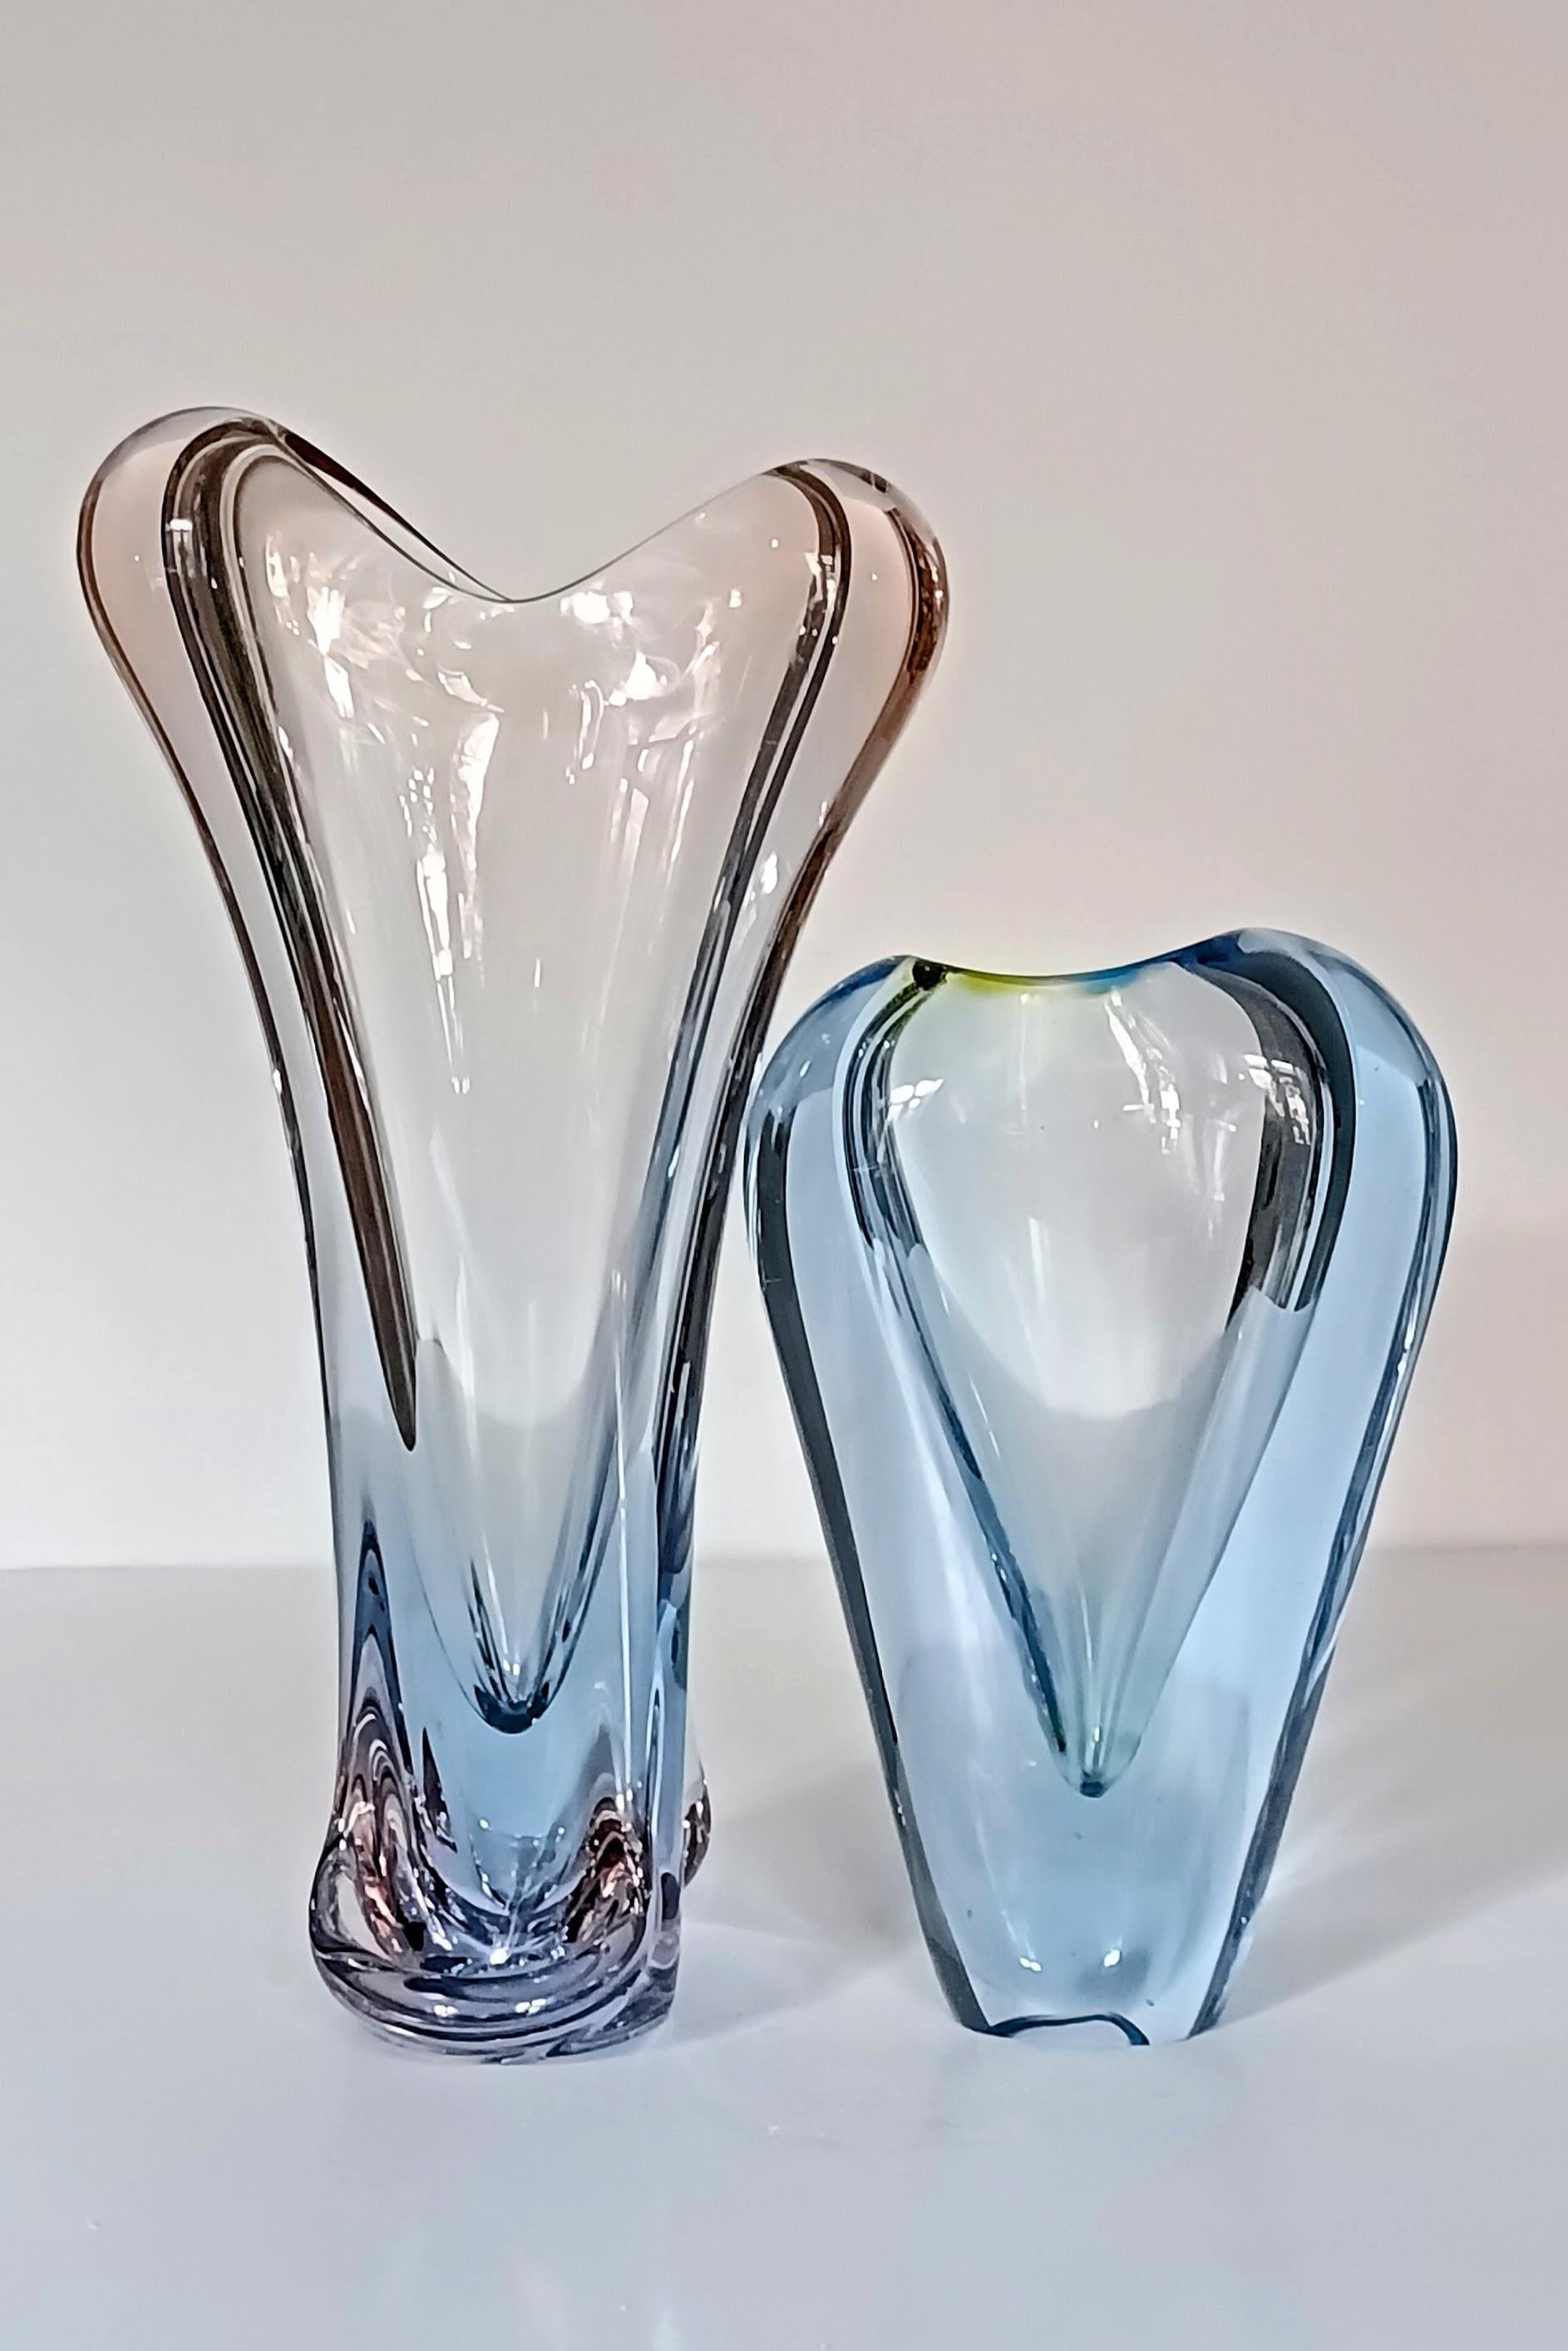 Sculptural pair of glass vases by Jan Beránek for Skrdlovice - hand crafted in the Czech Republic circa the 1950s.

The Beránek glassworks was founded by Emanuel Beránek and his two brothers Bohuslav and Josef, in the village of Skrdlovice in 1941.